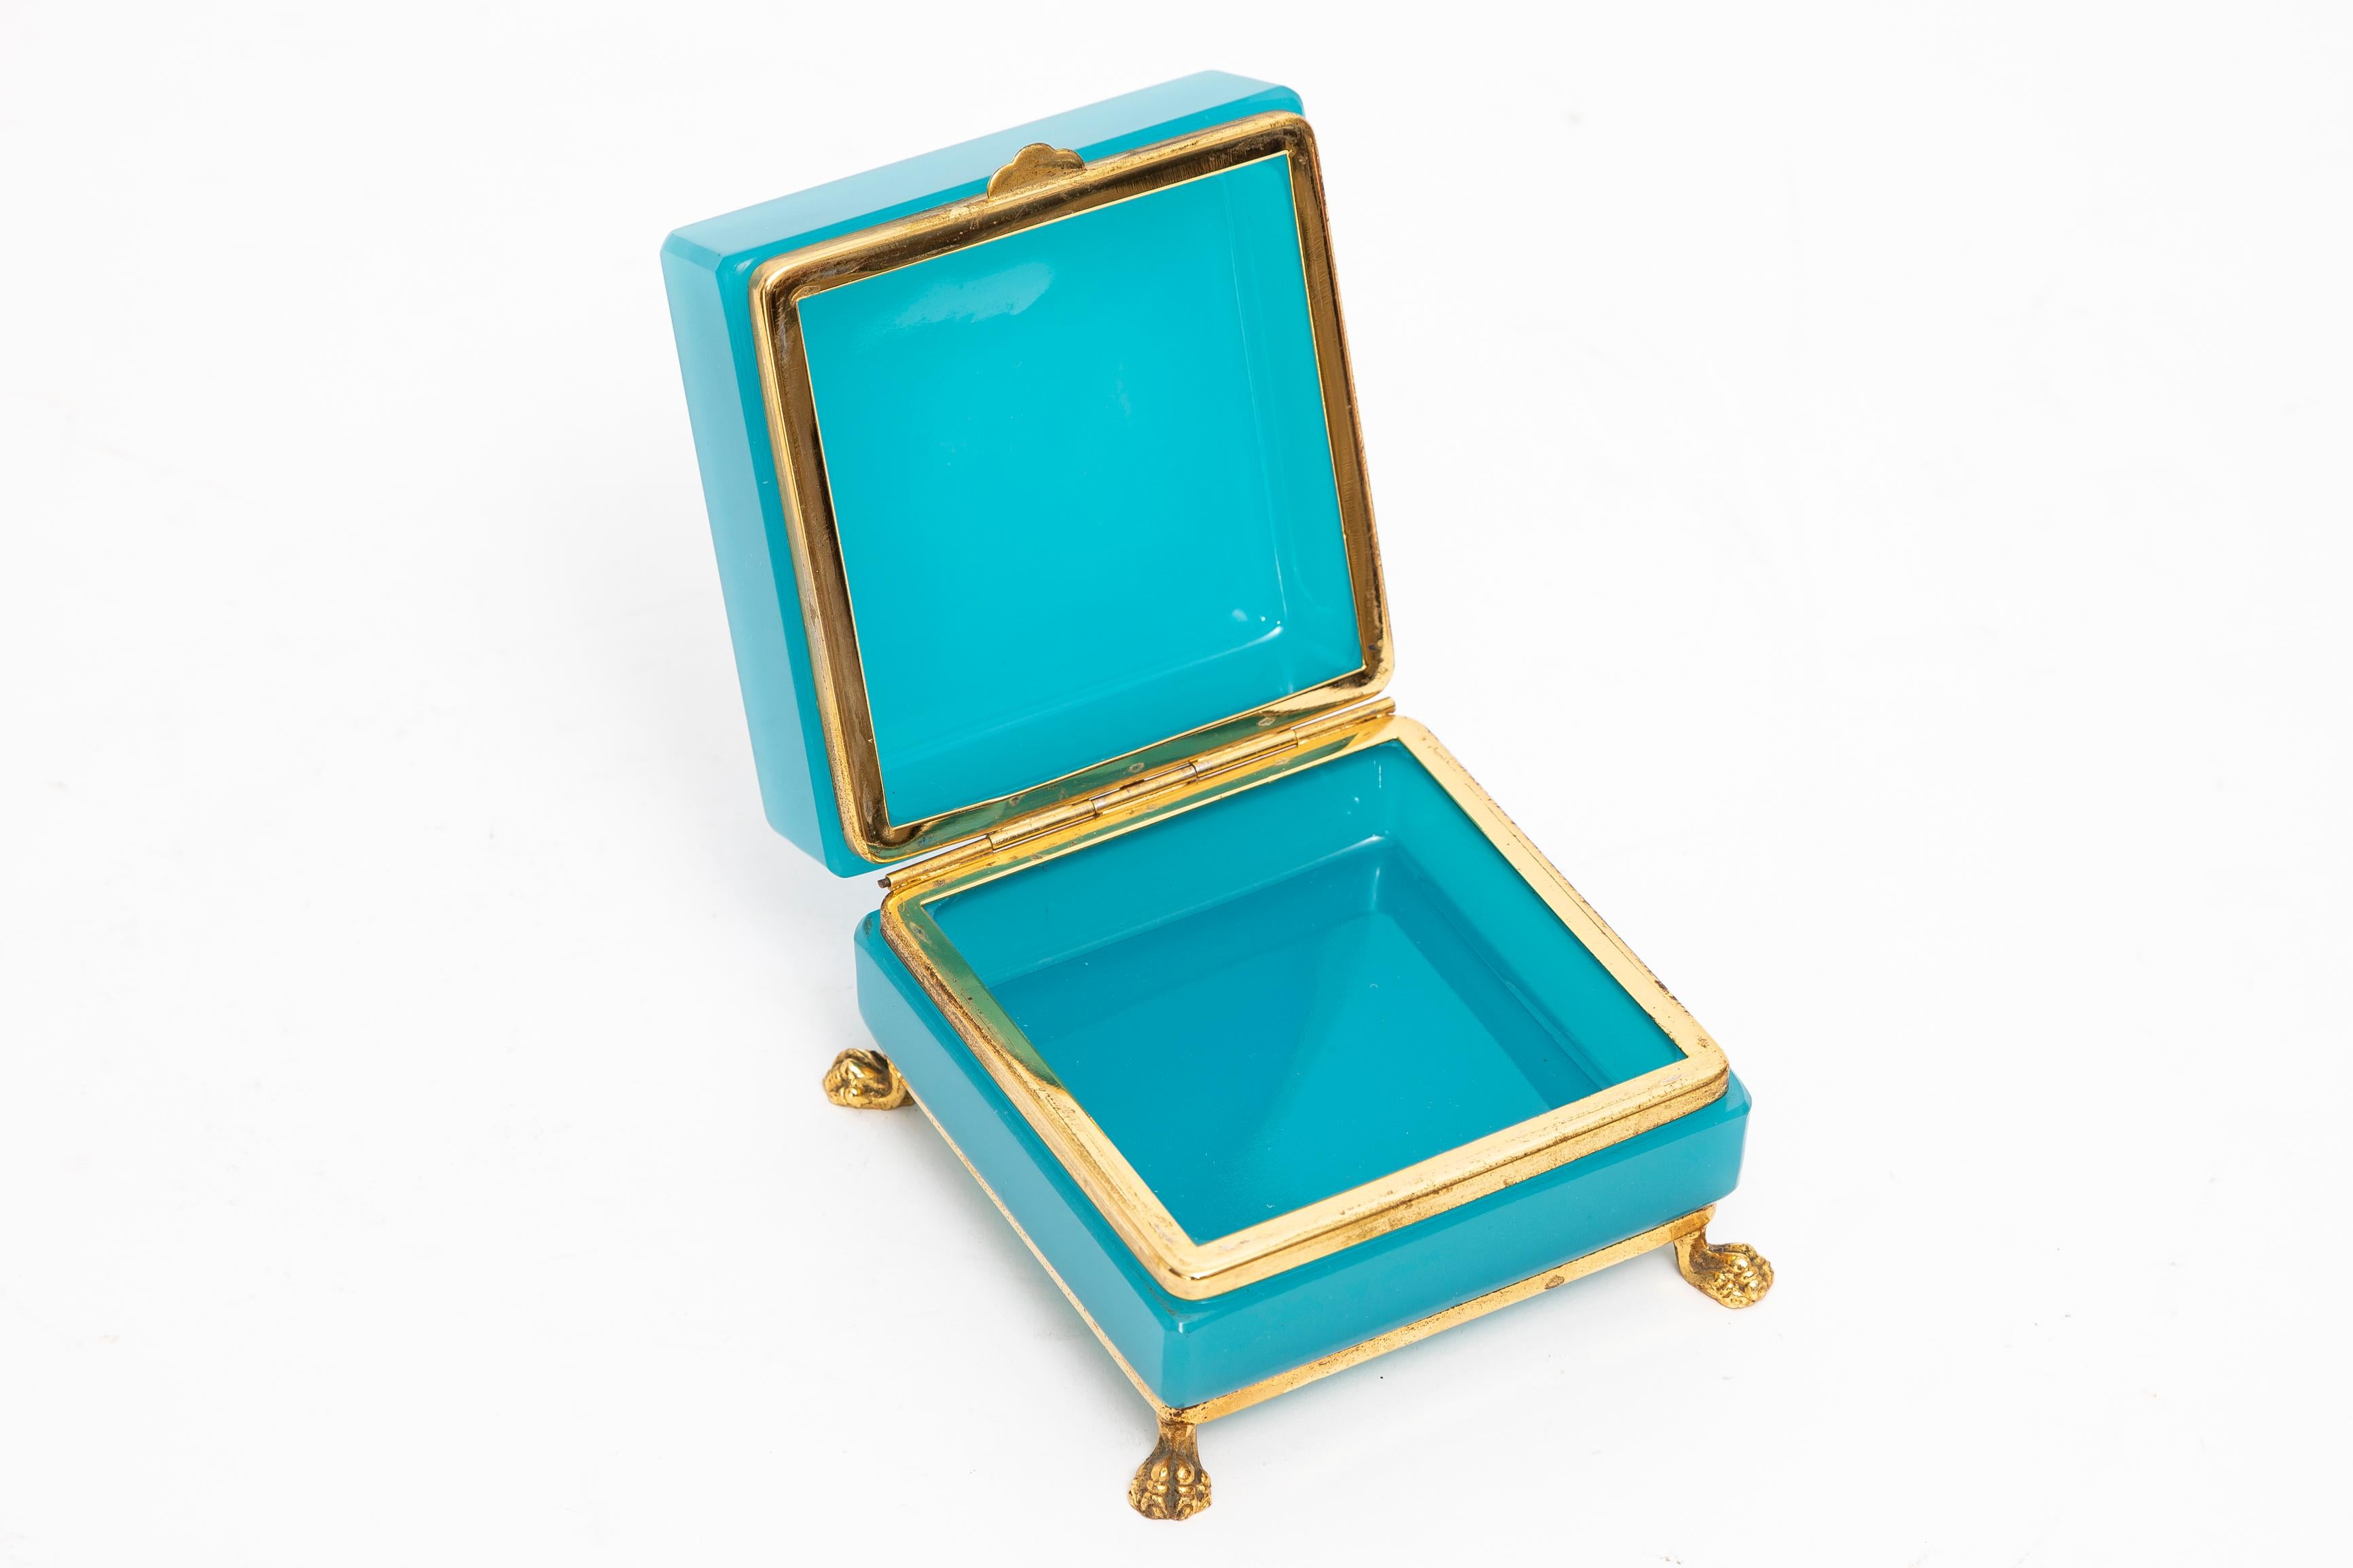 French Mid-Century Mod. Blue Opaline & Dore Bronze Footed Jewel-Box or Tea-Caddy

Indulge in the timeless allure of a truly remarkable artifact with this Fantastic Large Square French Mid-Century Modern Blue Opaline & Dore Bronze Footed